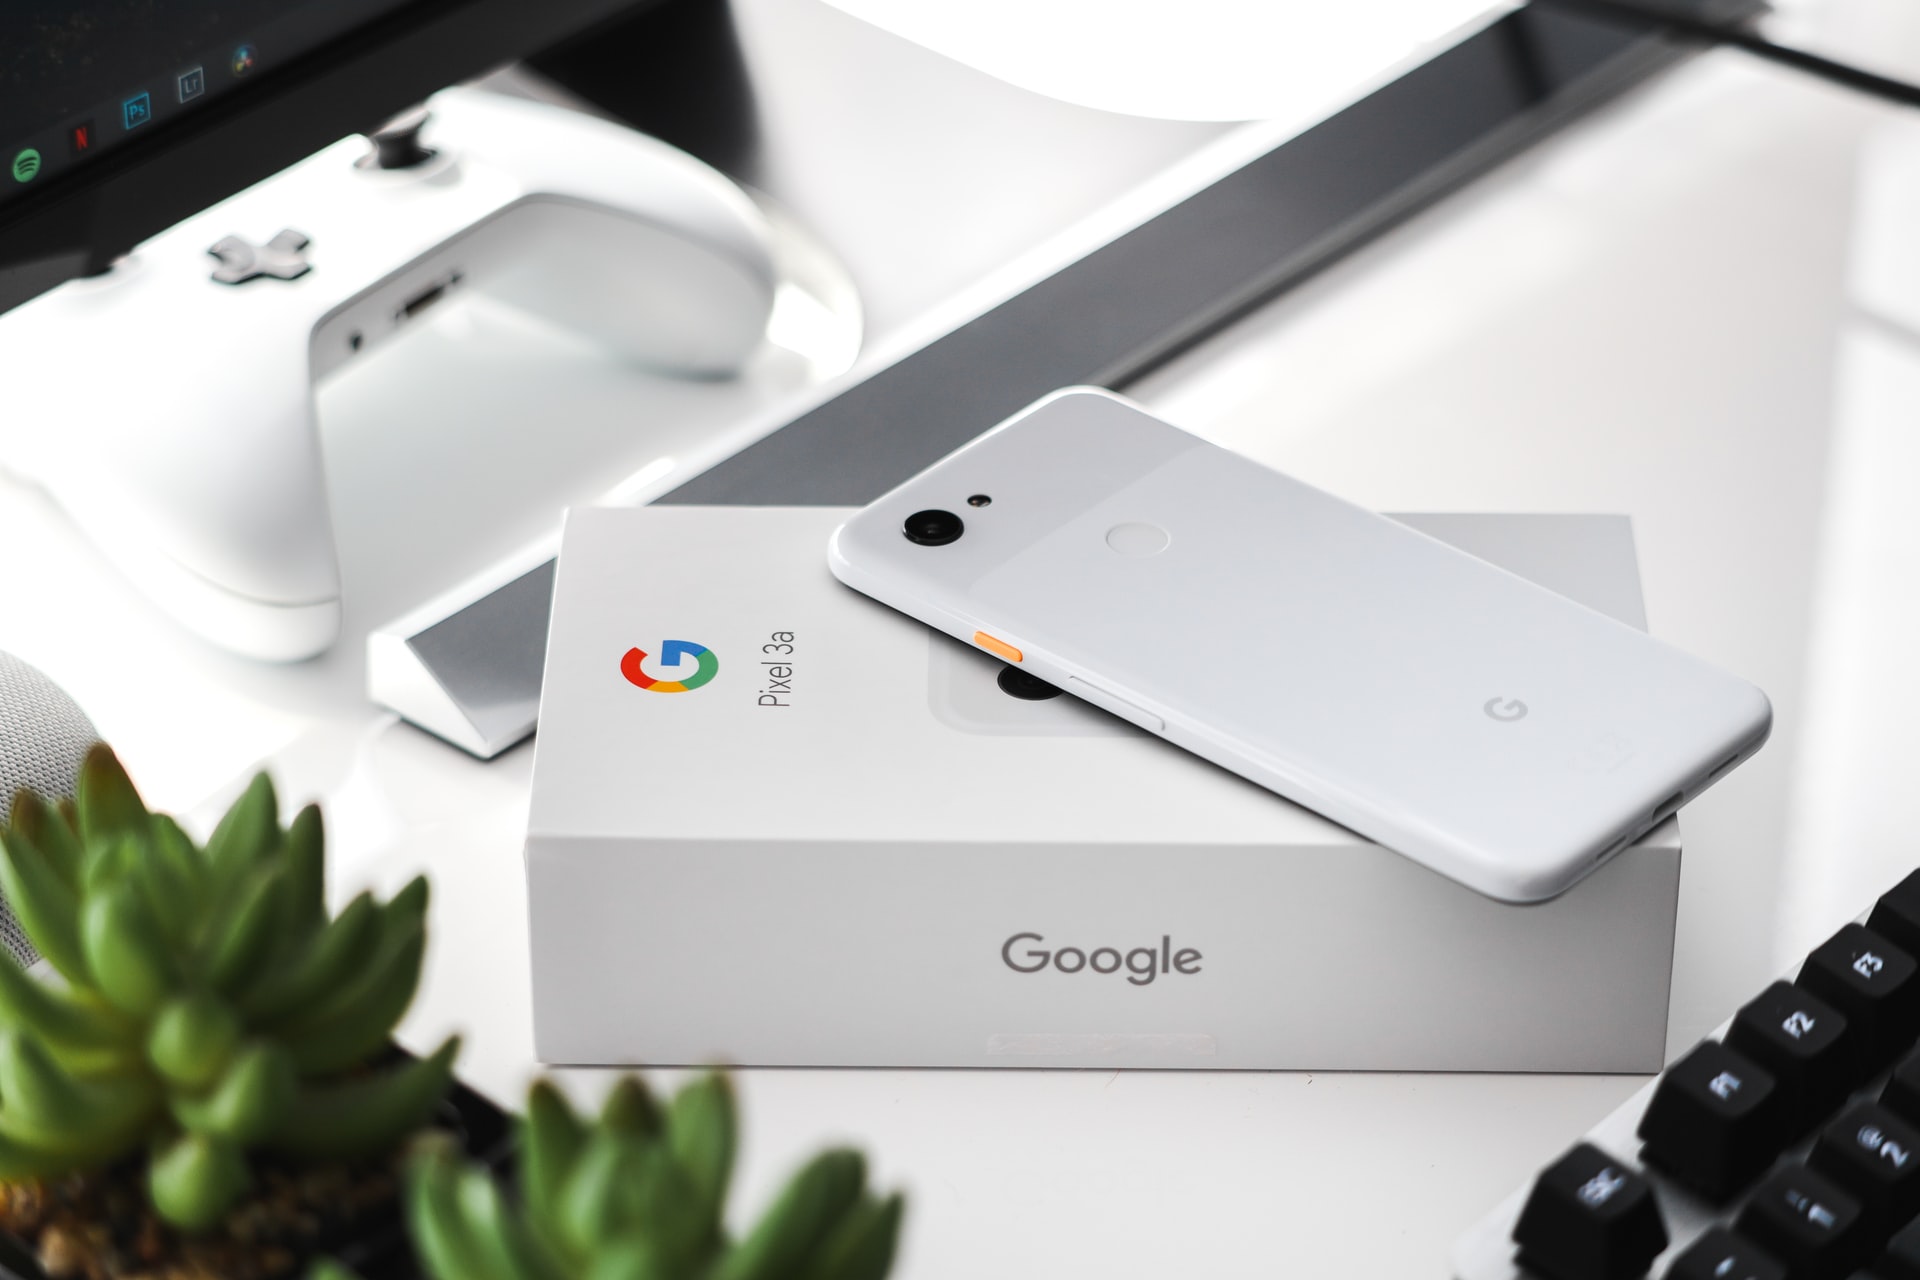 Get the Google Pixel 3a at an incredible price